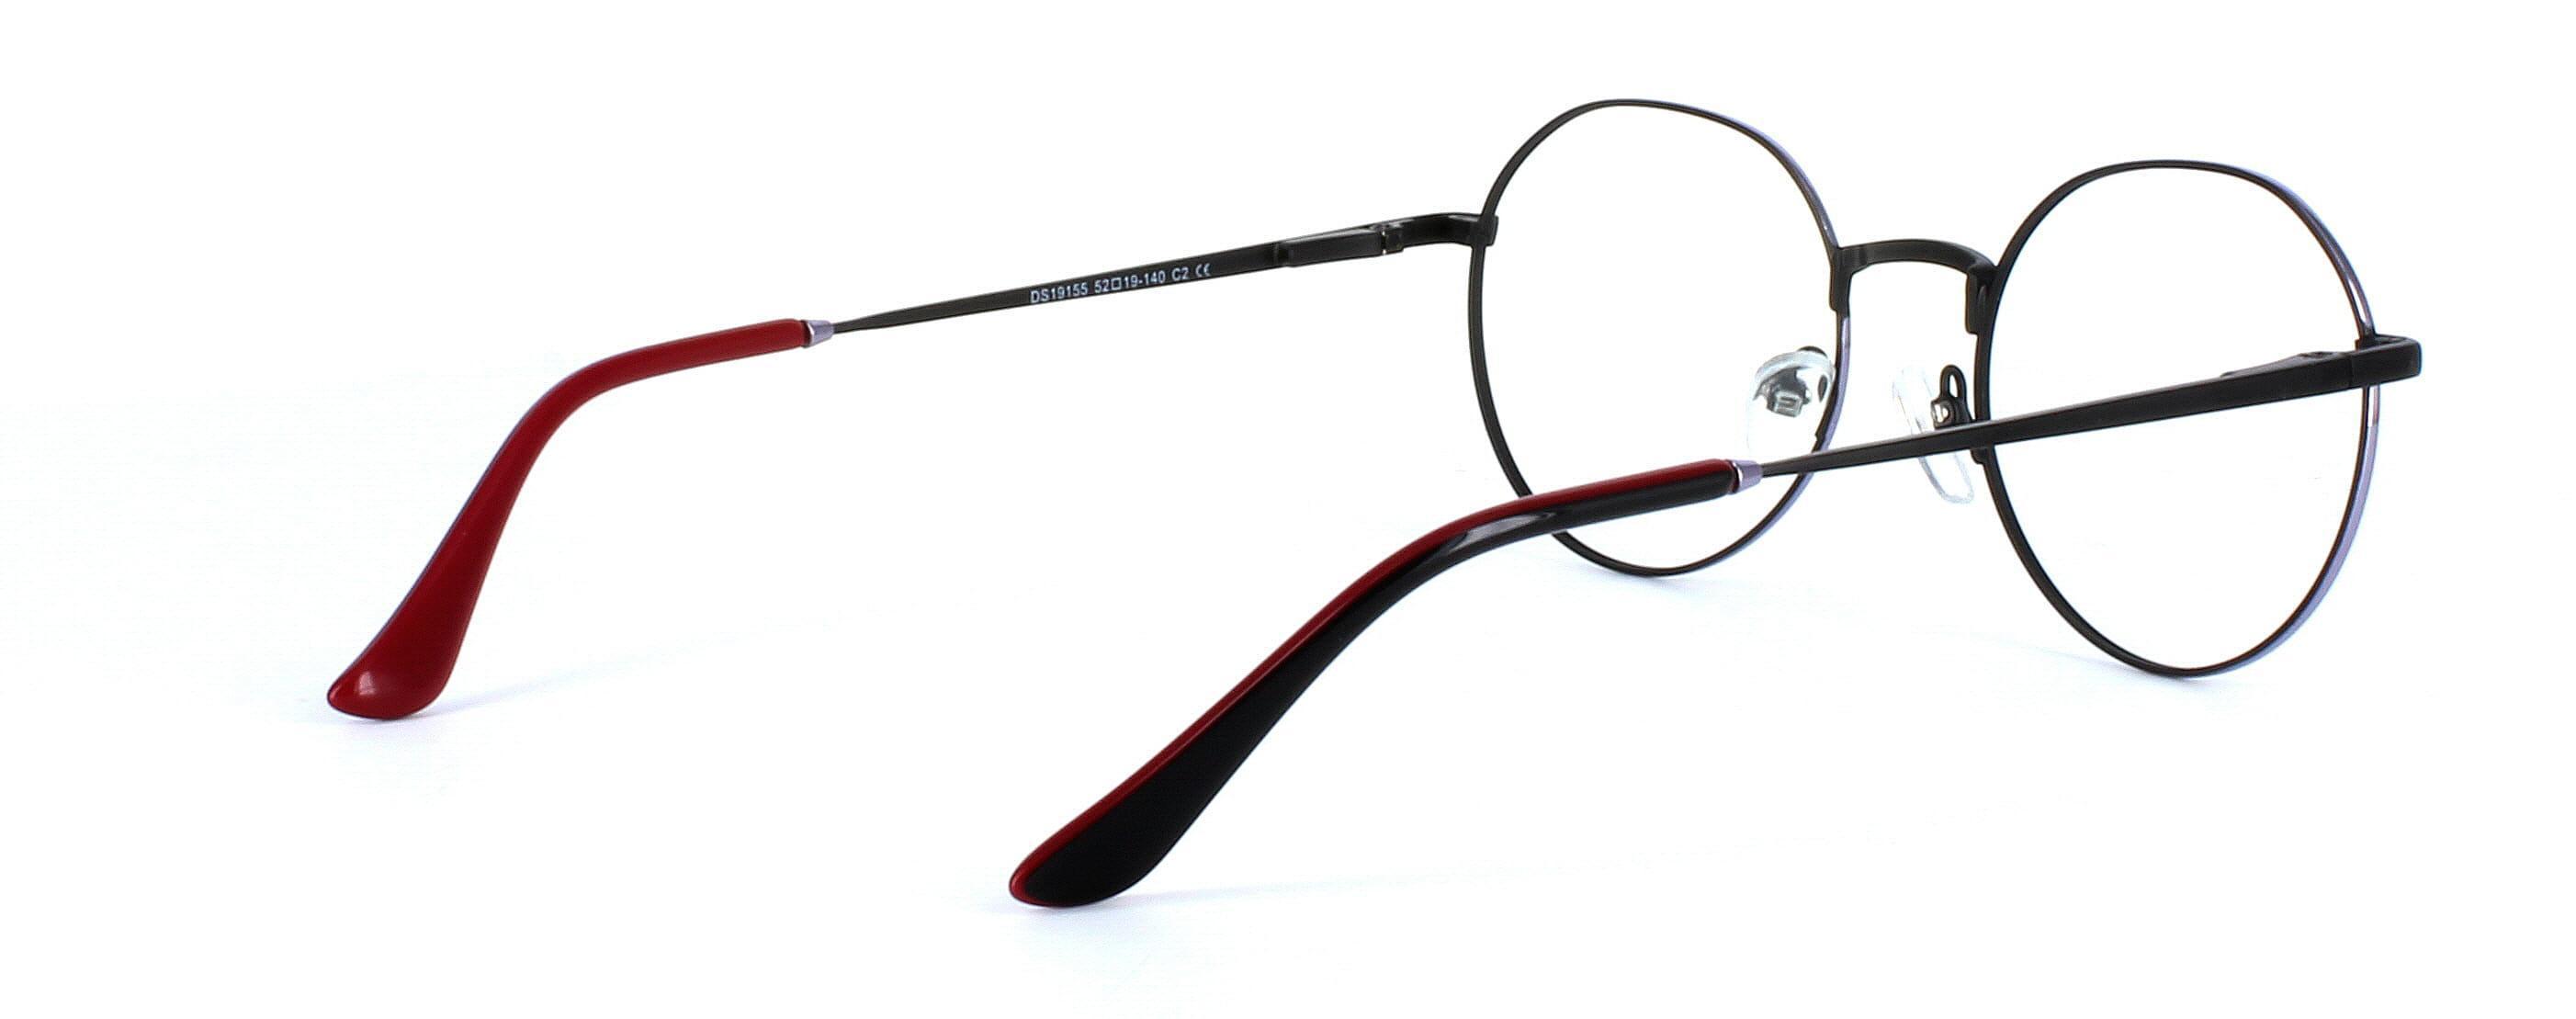 Round shaped unisex metal glasses in black with red arm tips - image view 4